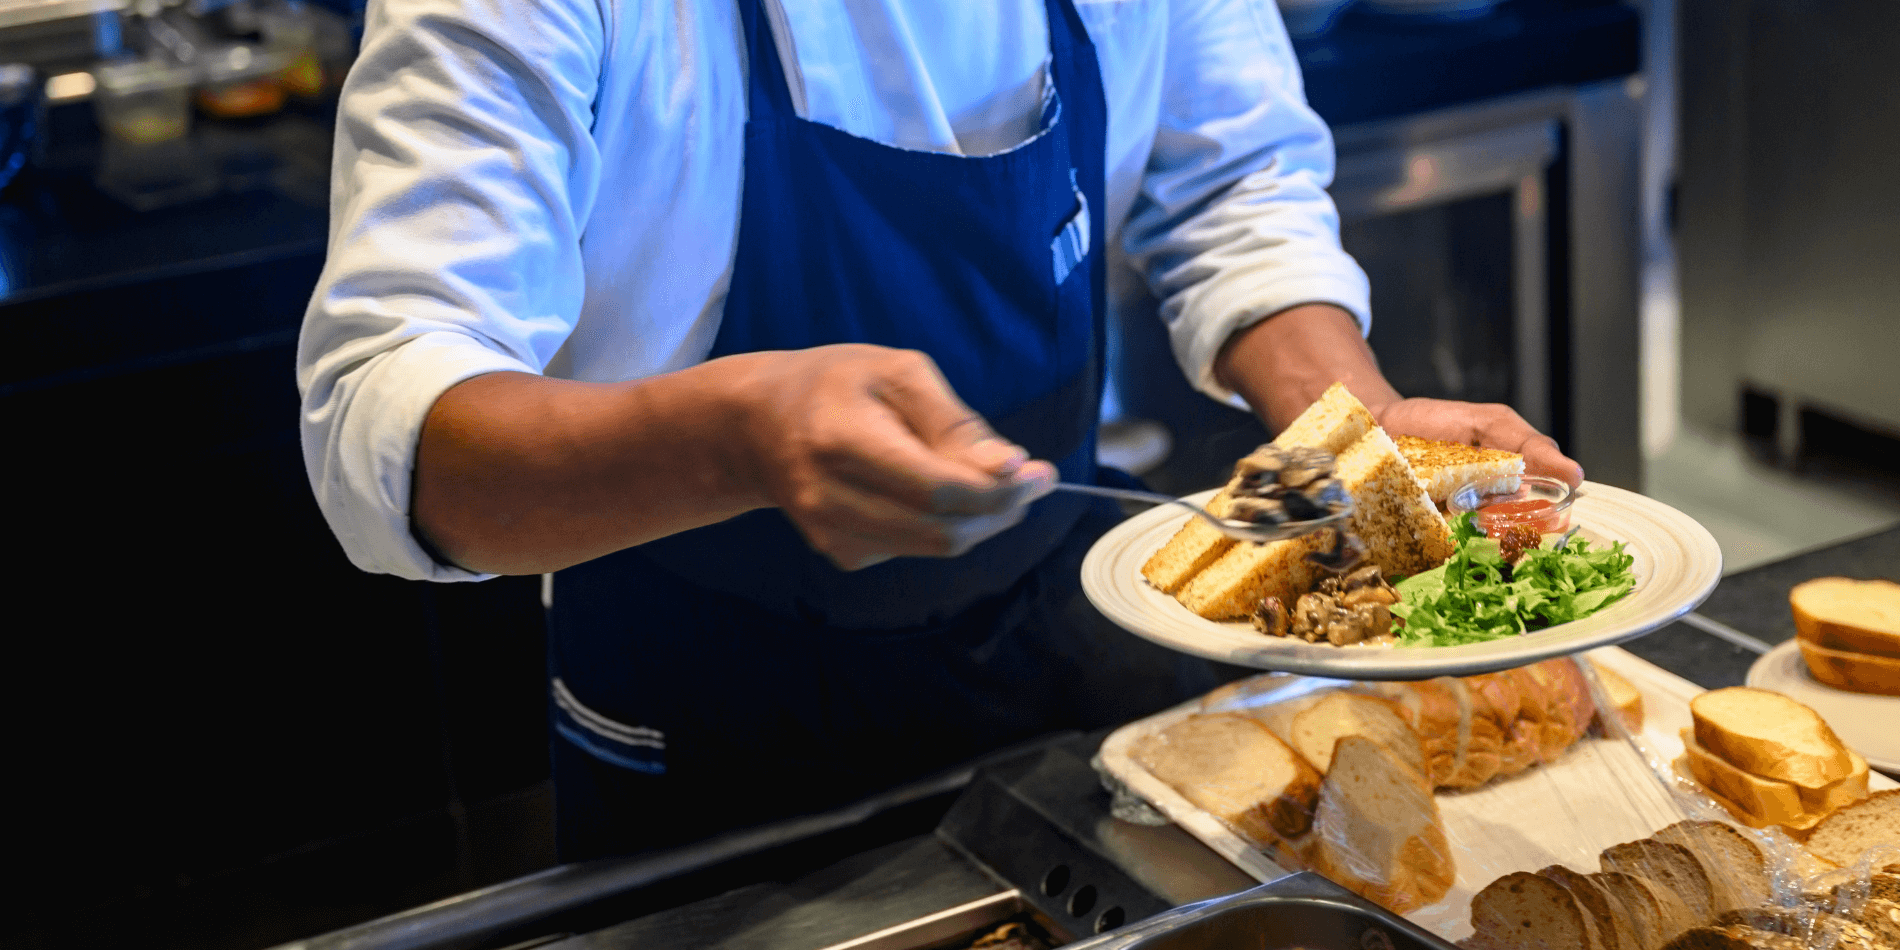 California’s Food Handler Hard Law has a positive impact on restaurant workers